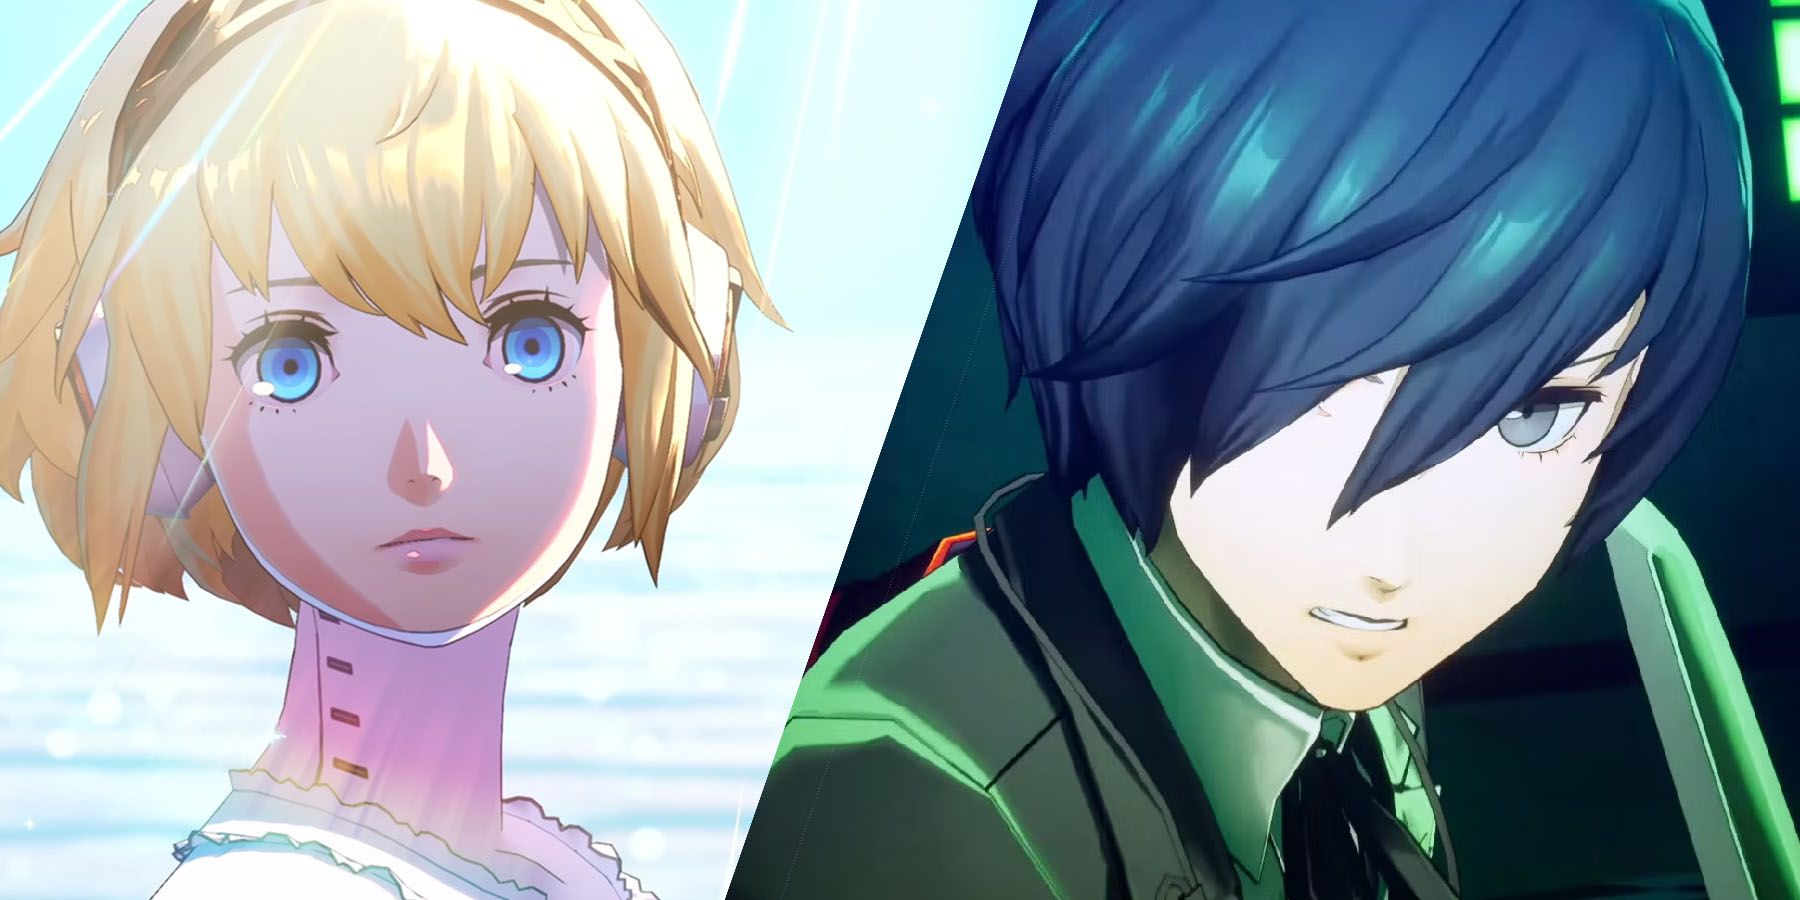 Persona 3 Reload battle system teaser shows off menus and attacks,  character teasers introduce Ken and Aigis